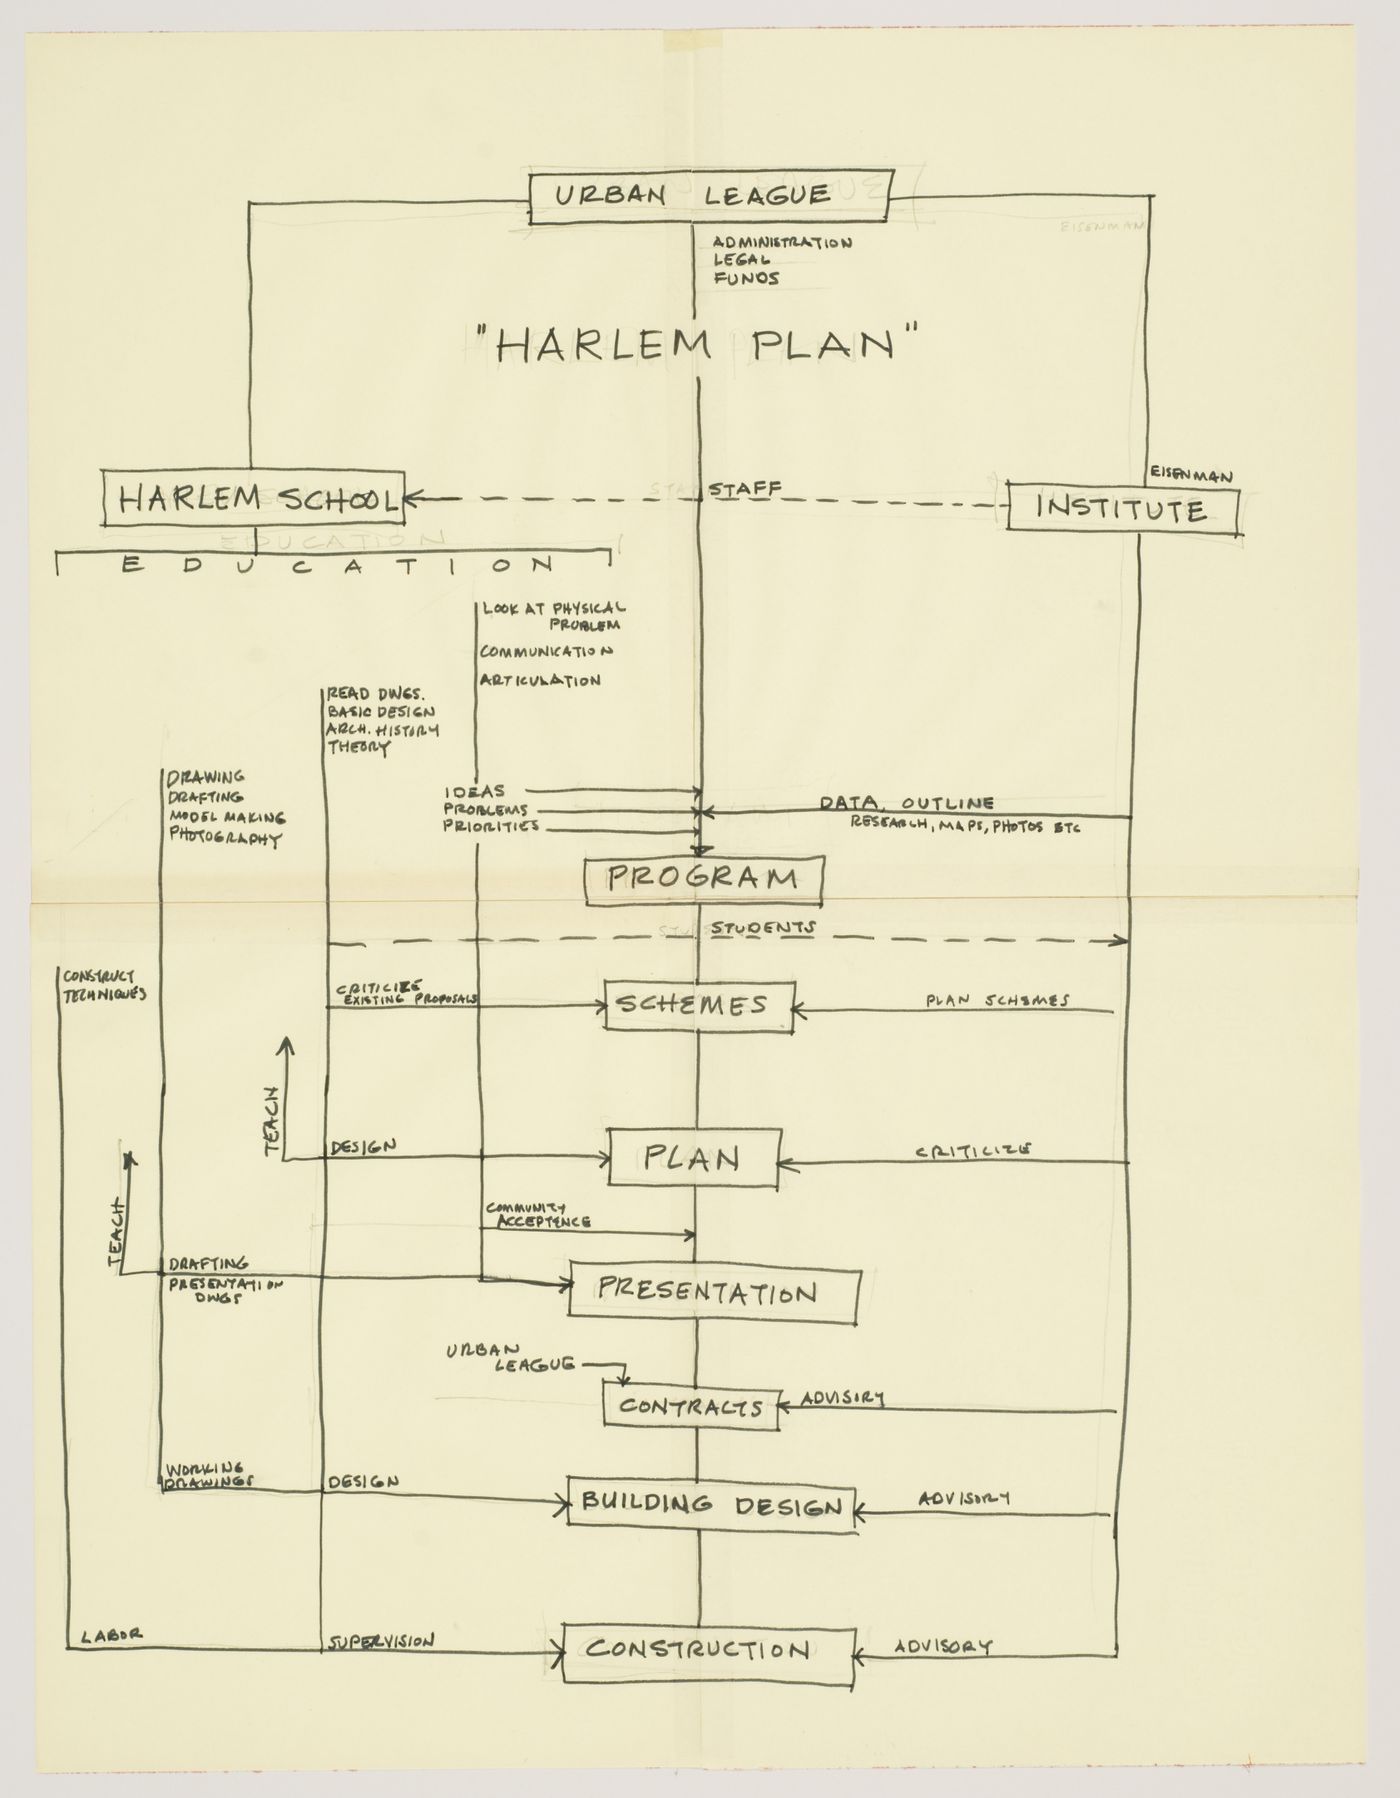 Notes and diagram for Harlem Plan